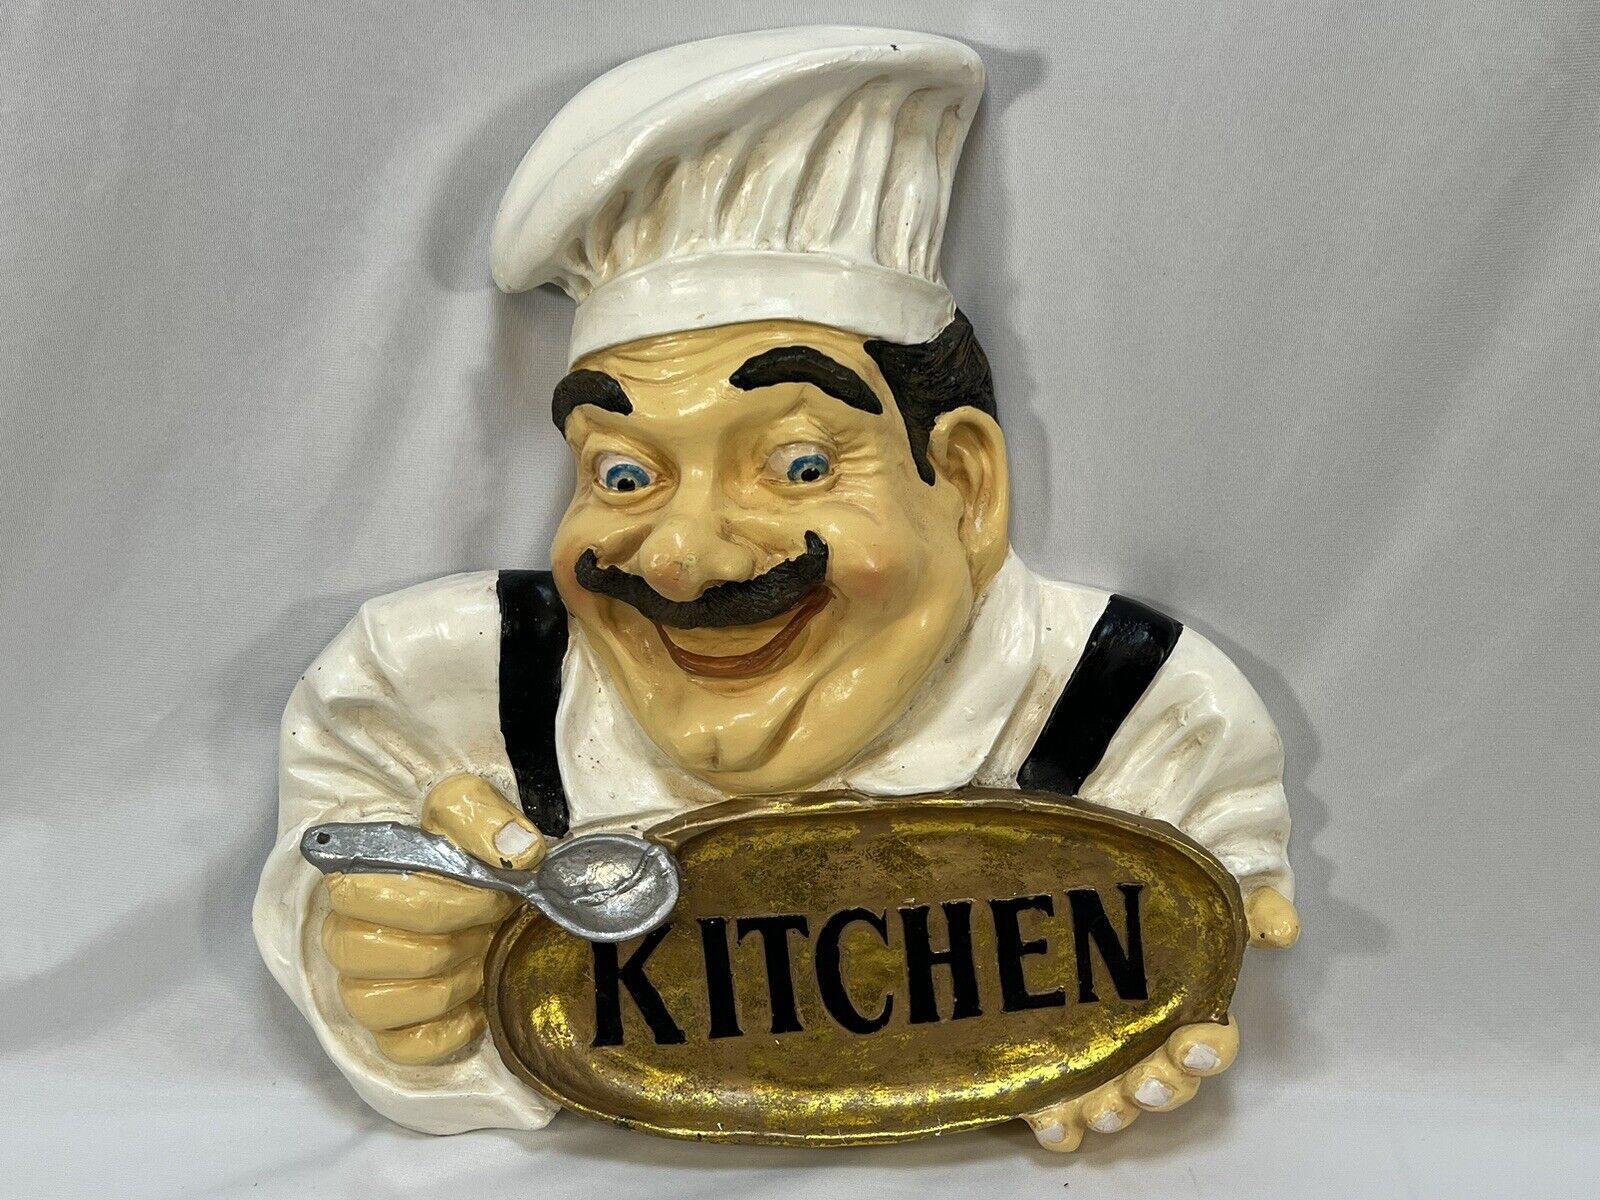 Vintage Kitchen Welcoming Italian Chef Wall Plaque Restaurant Pizza Shop Food